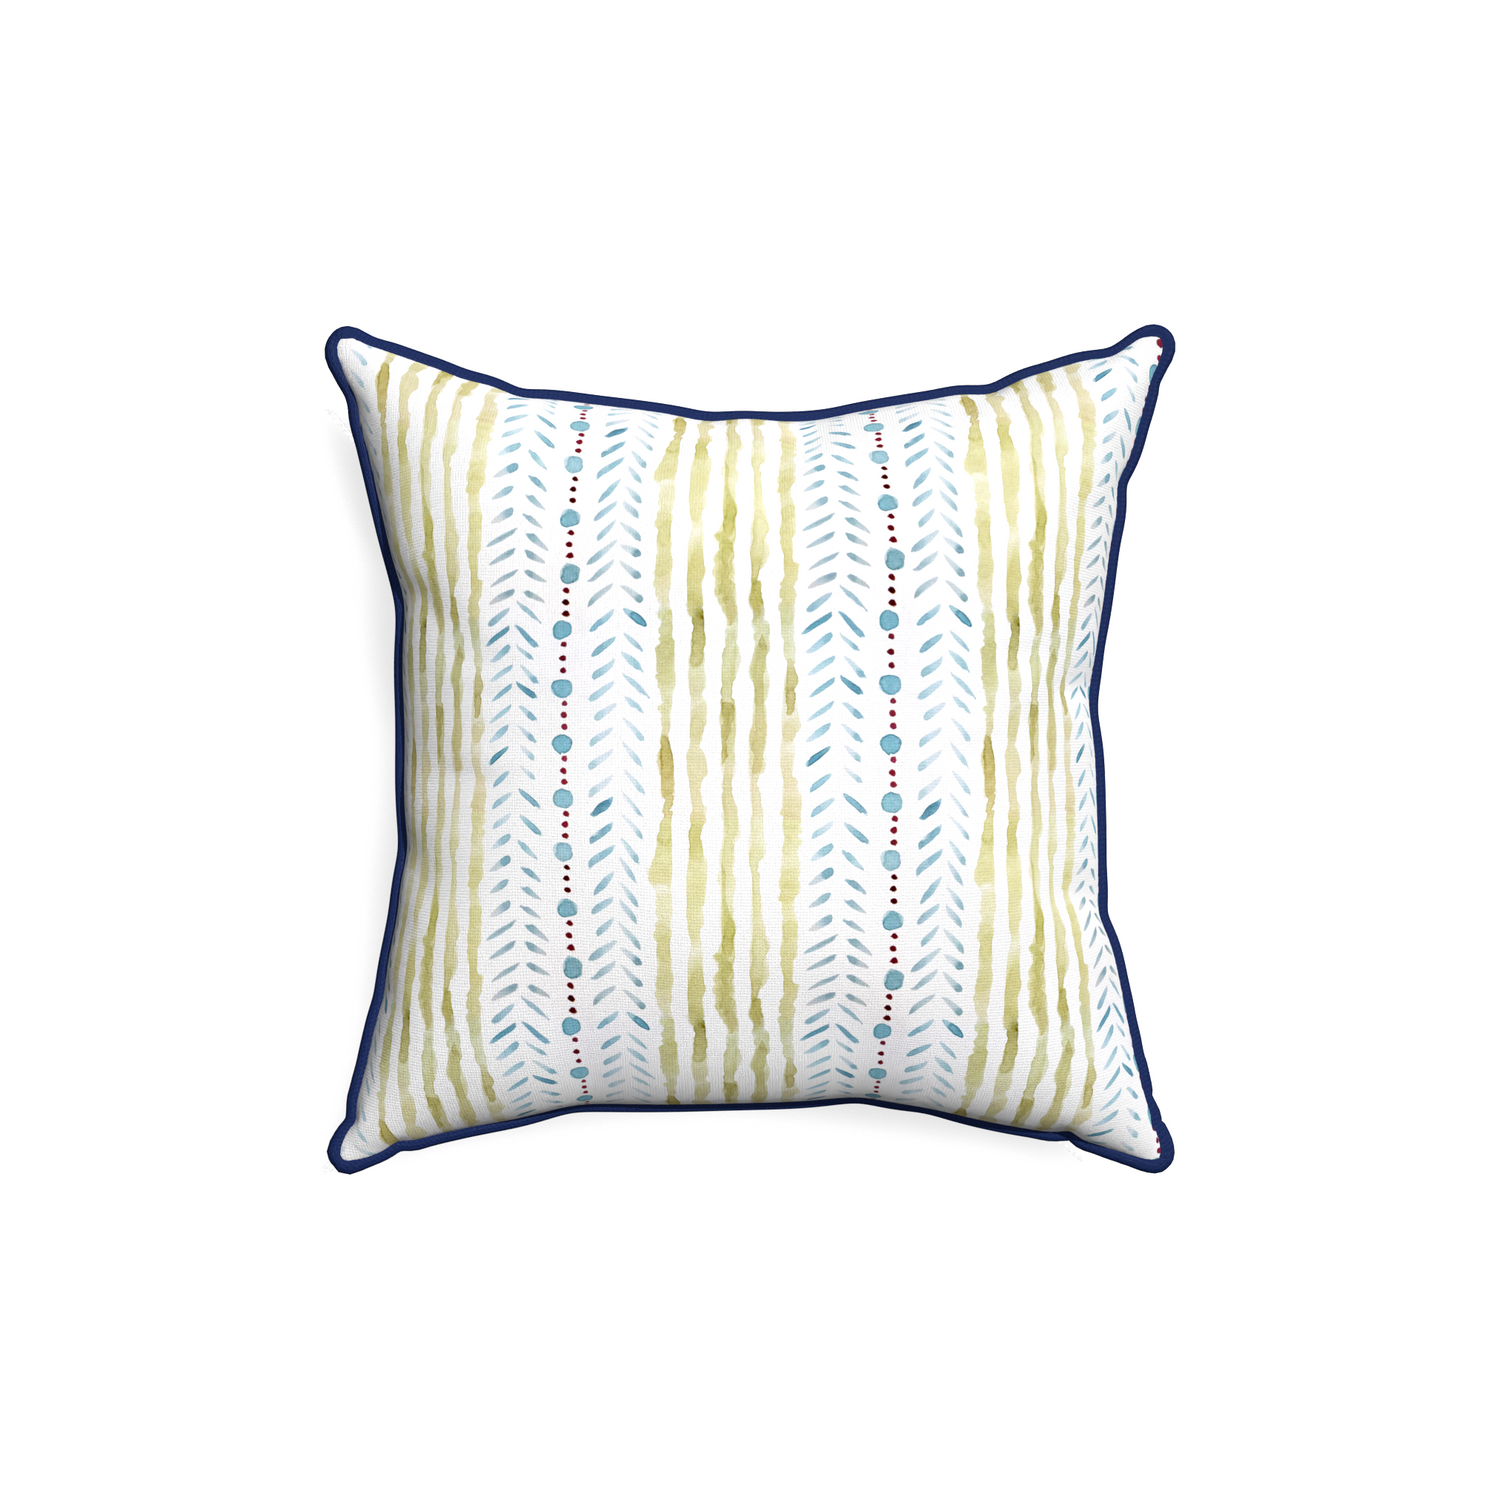 18-square julia custom blue & green stripedpillow with midnight piping on white background